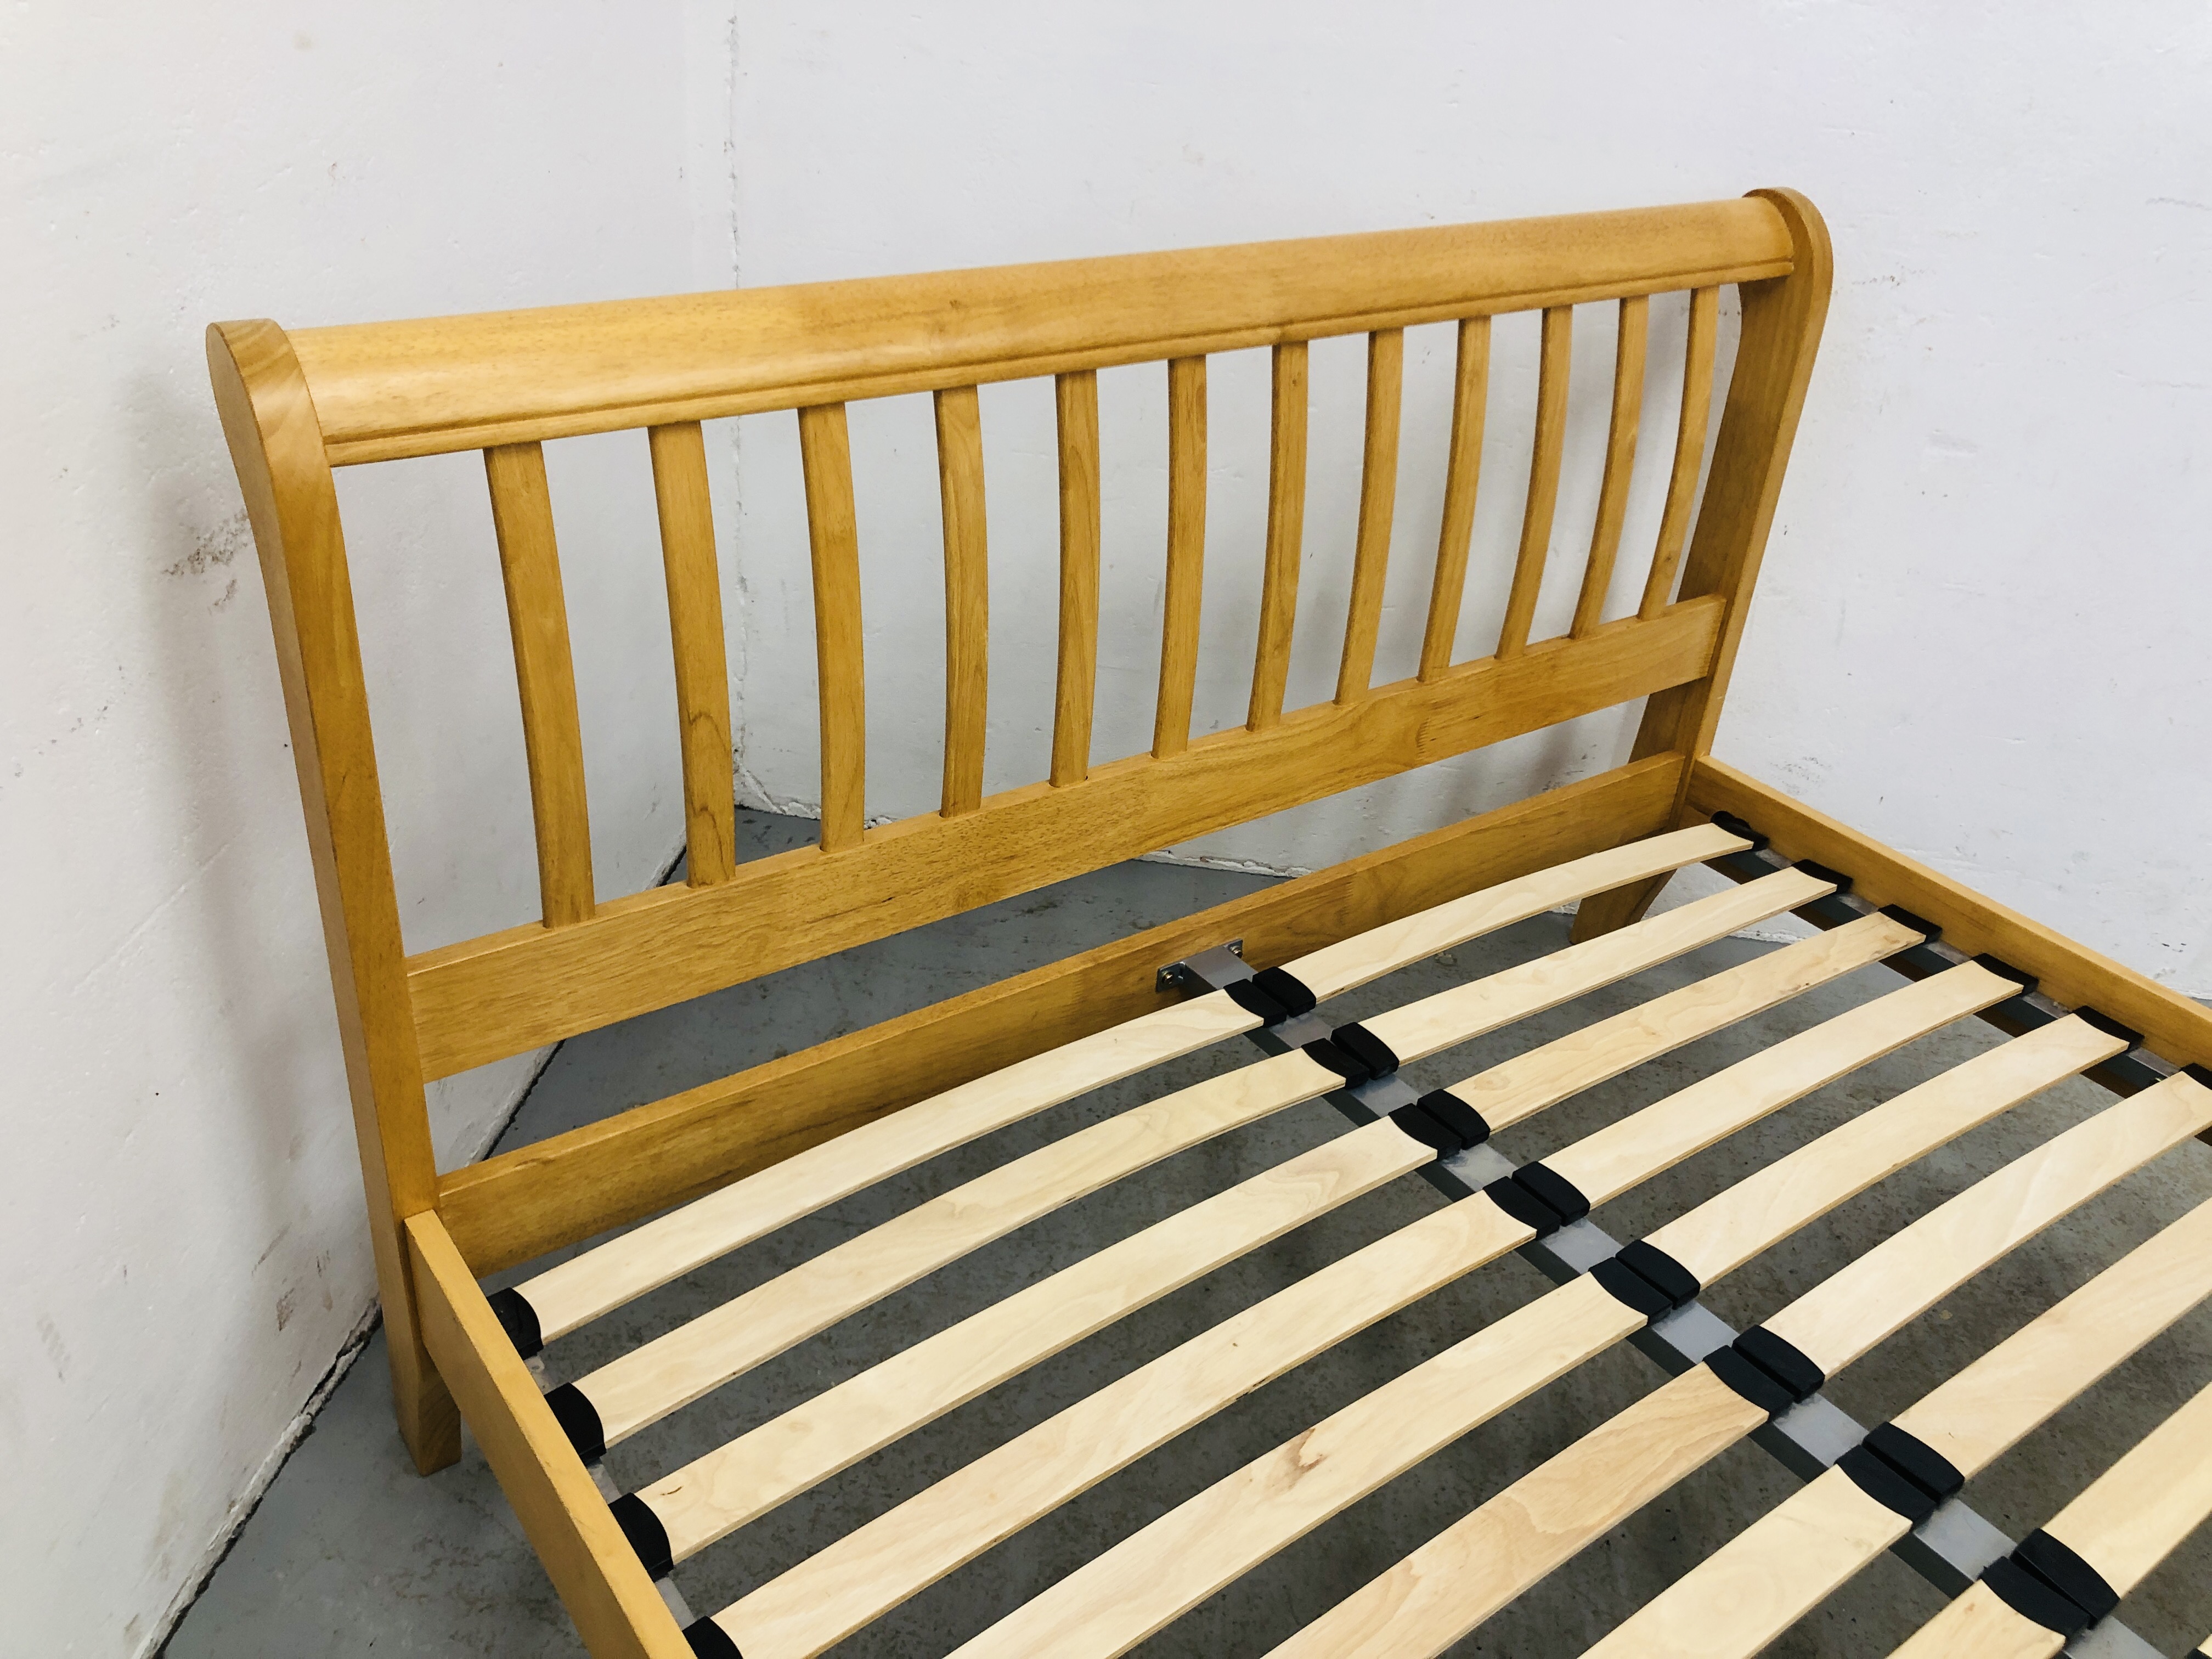 MODERN BEECH WOOD DOUBLE BED FRAME - Image 2 of 4